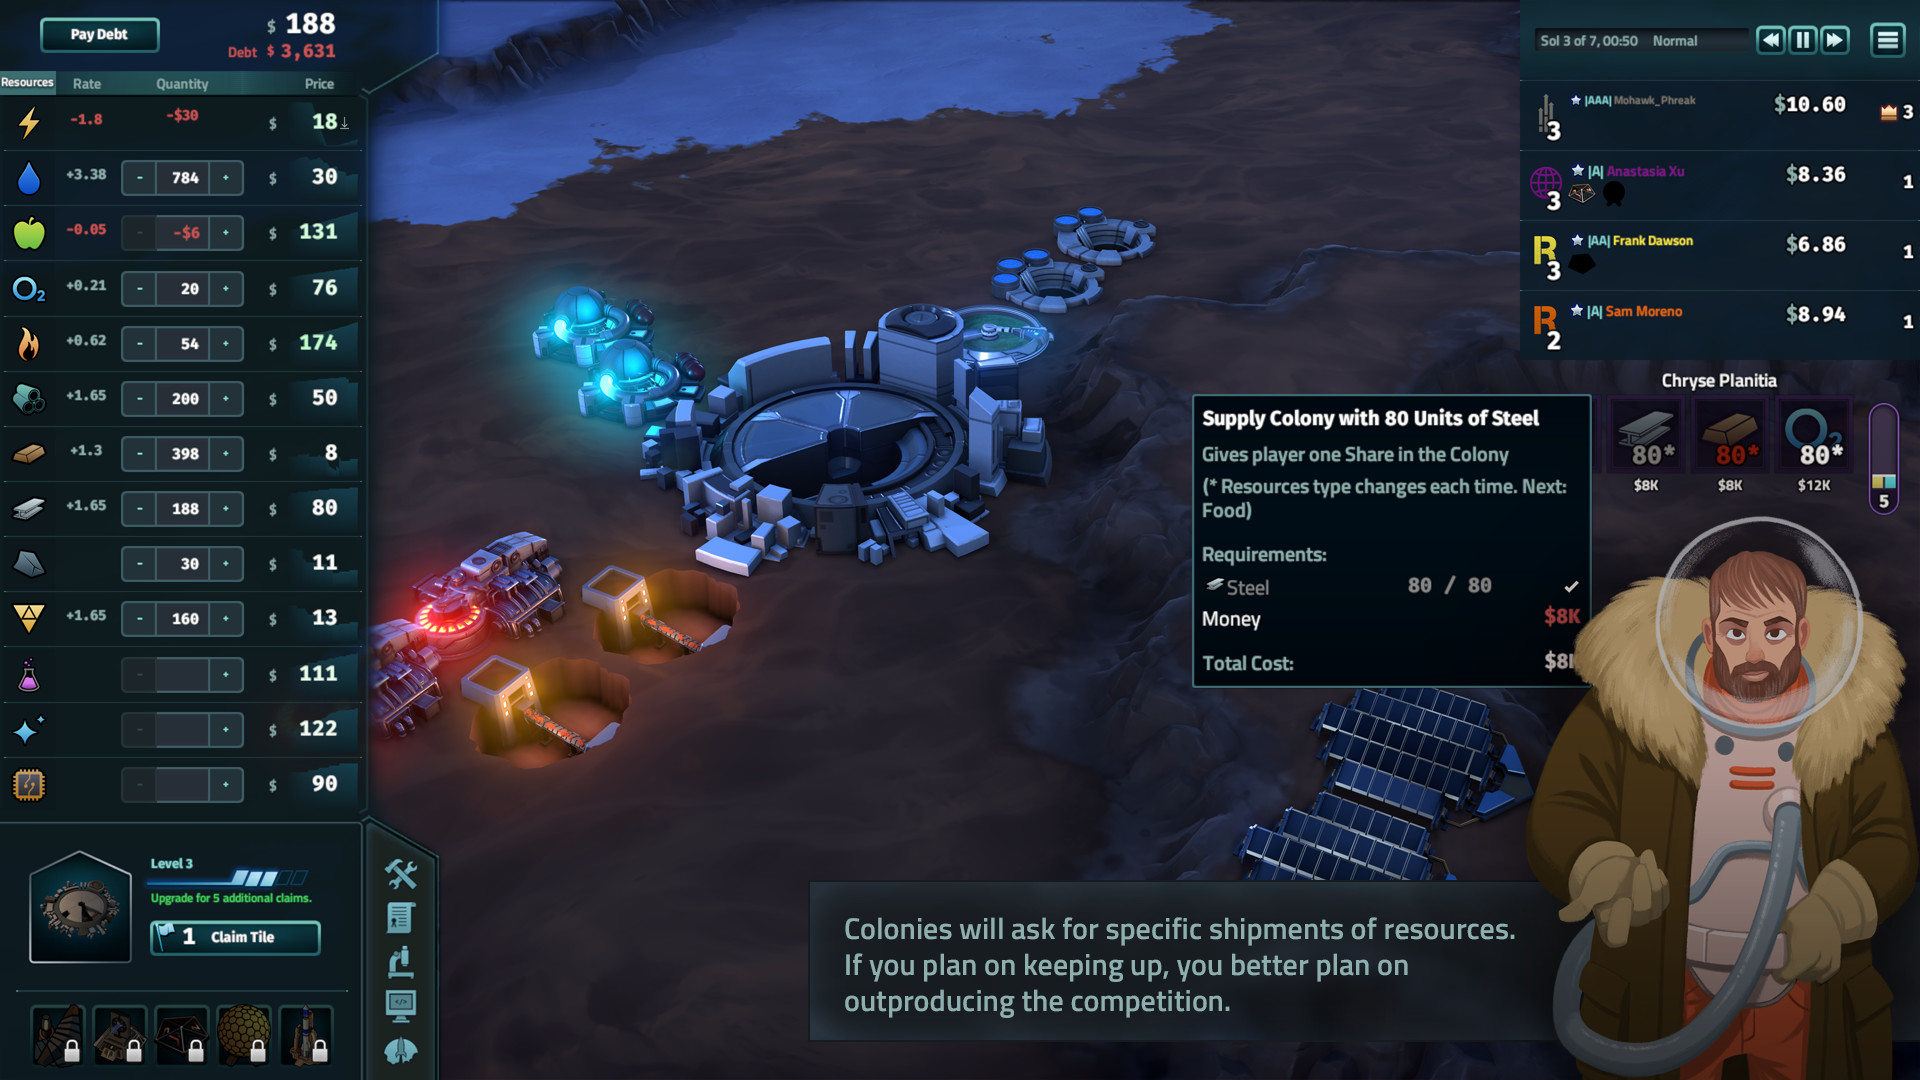 Offworld Trading Company - The Patron and the Patriot DLC Featured Screenshot #1